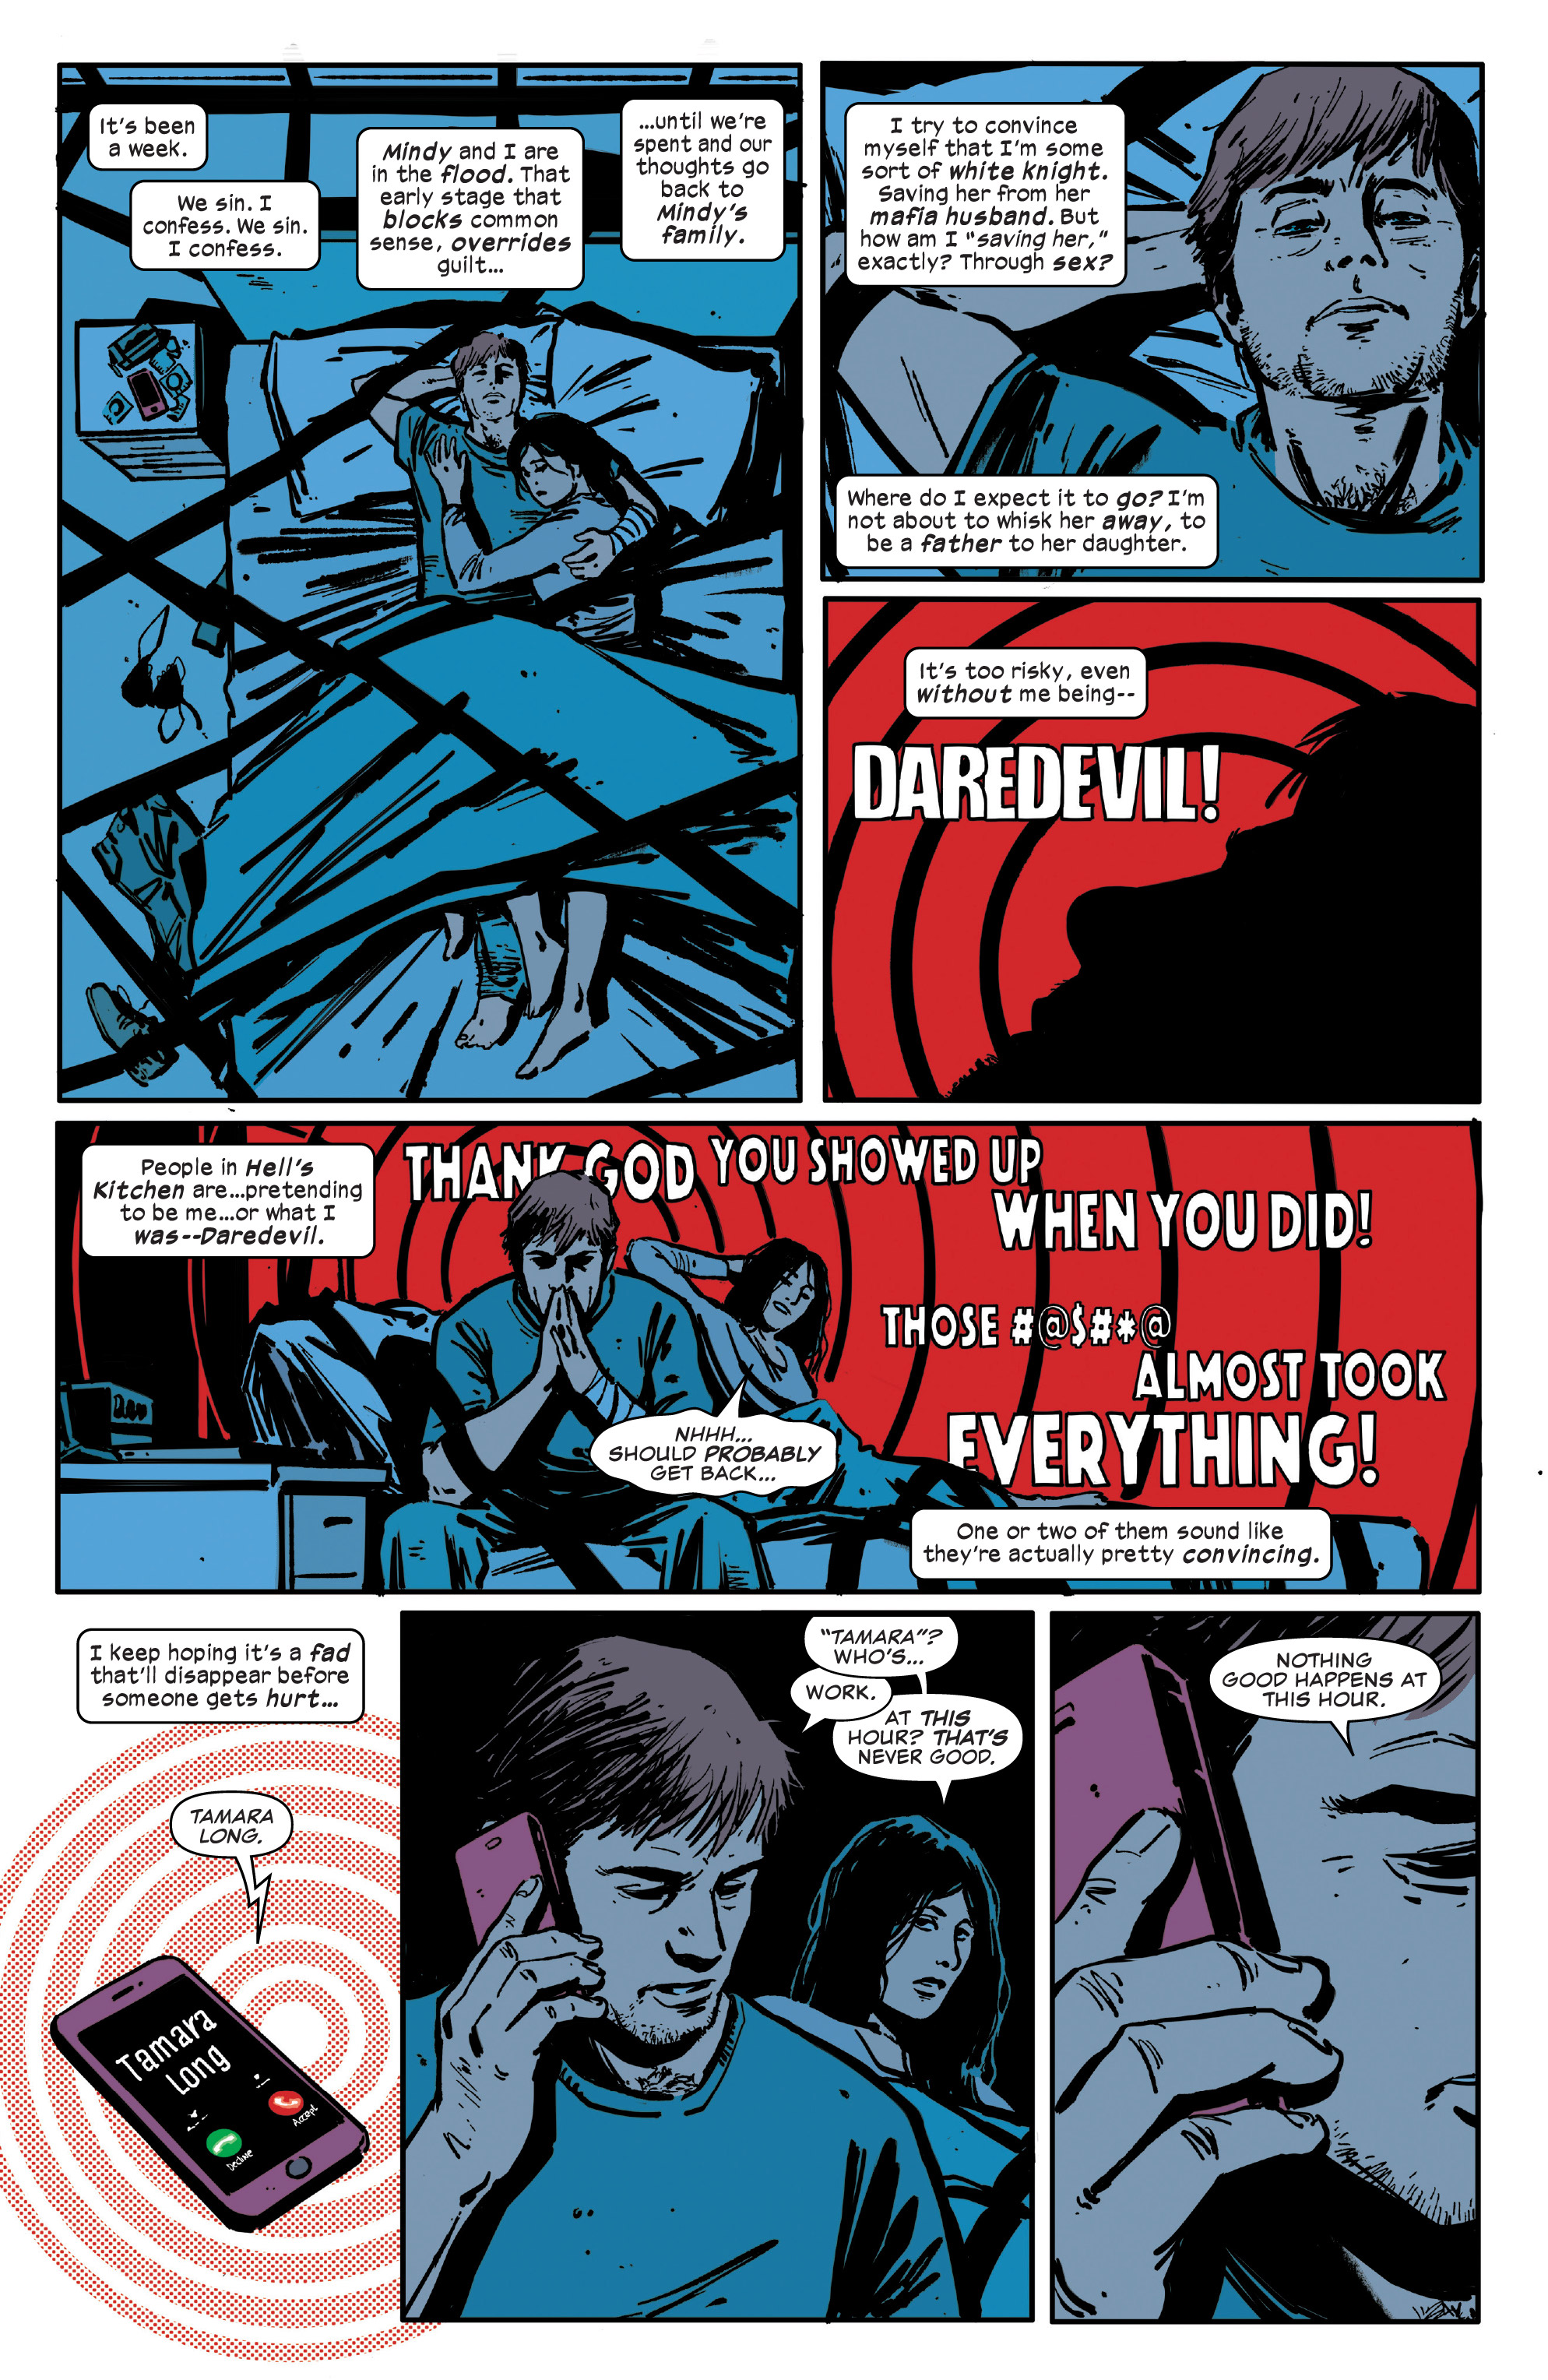 Daredevil (2019-): Chapter 10 - Page 4